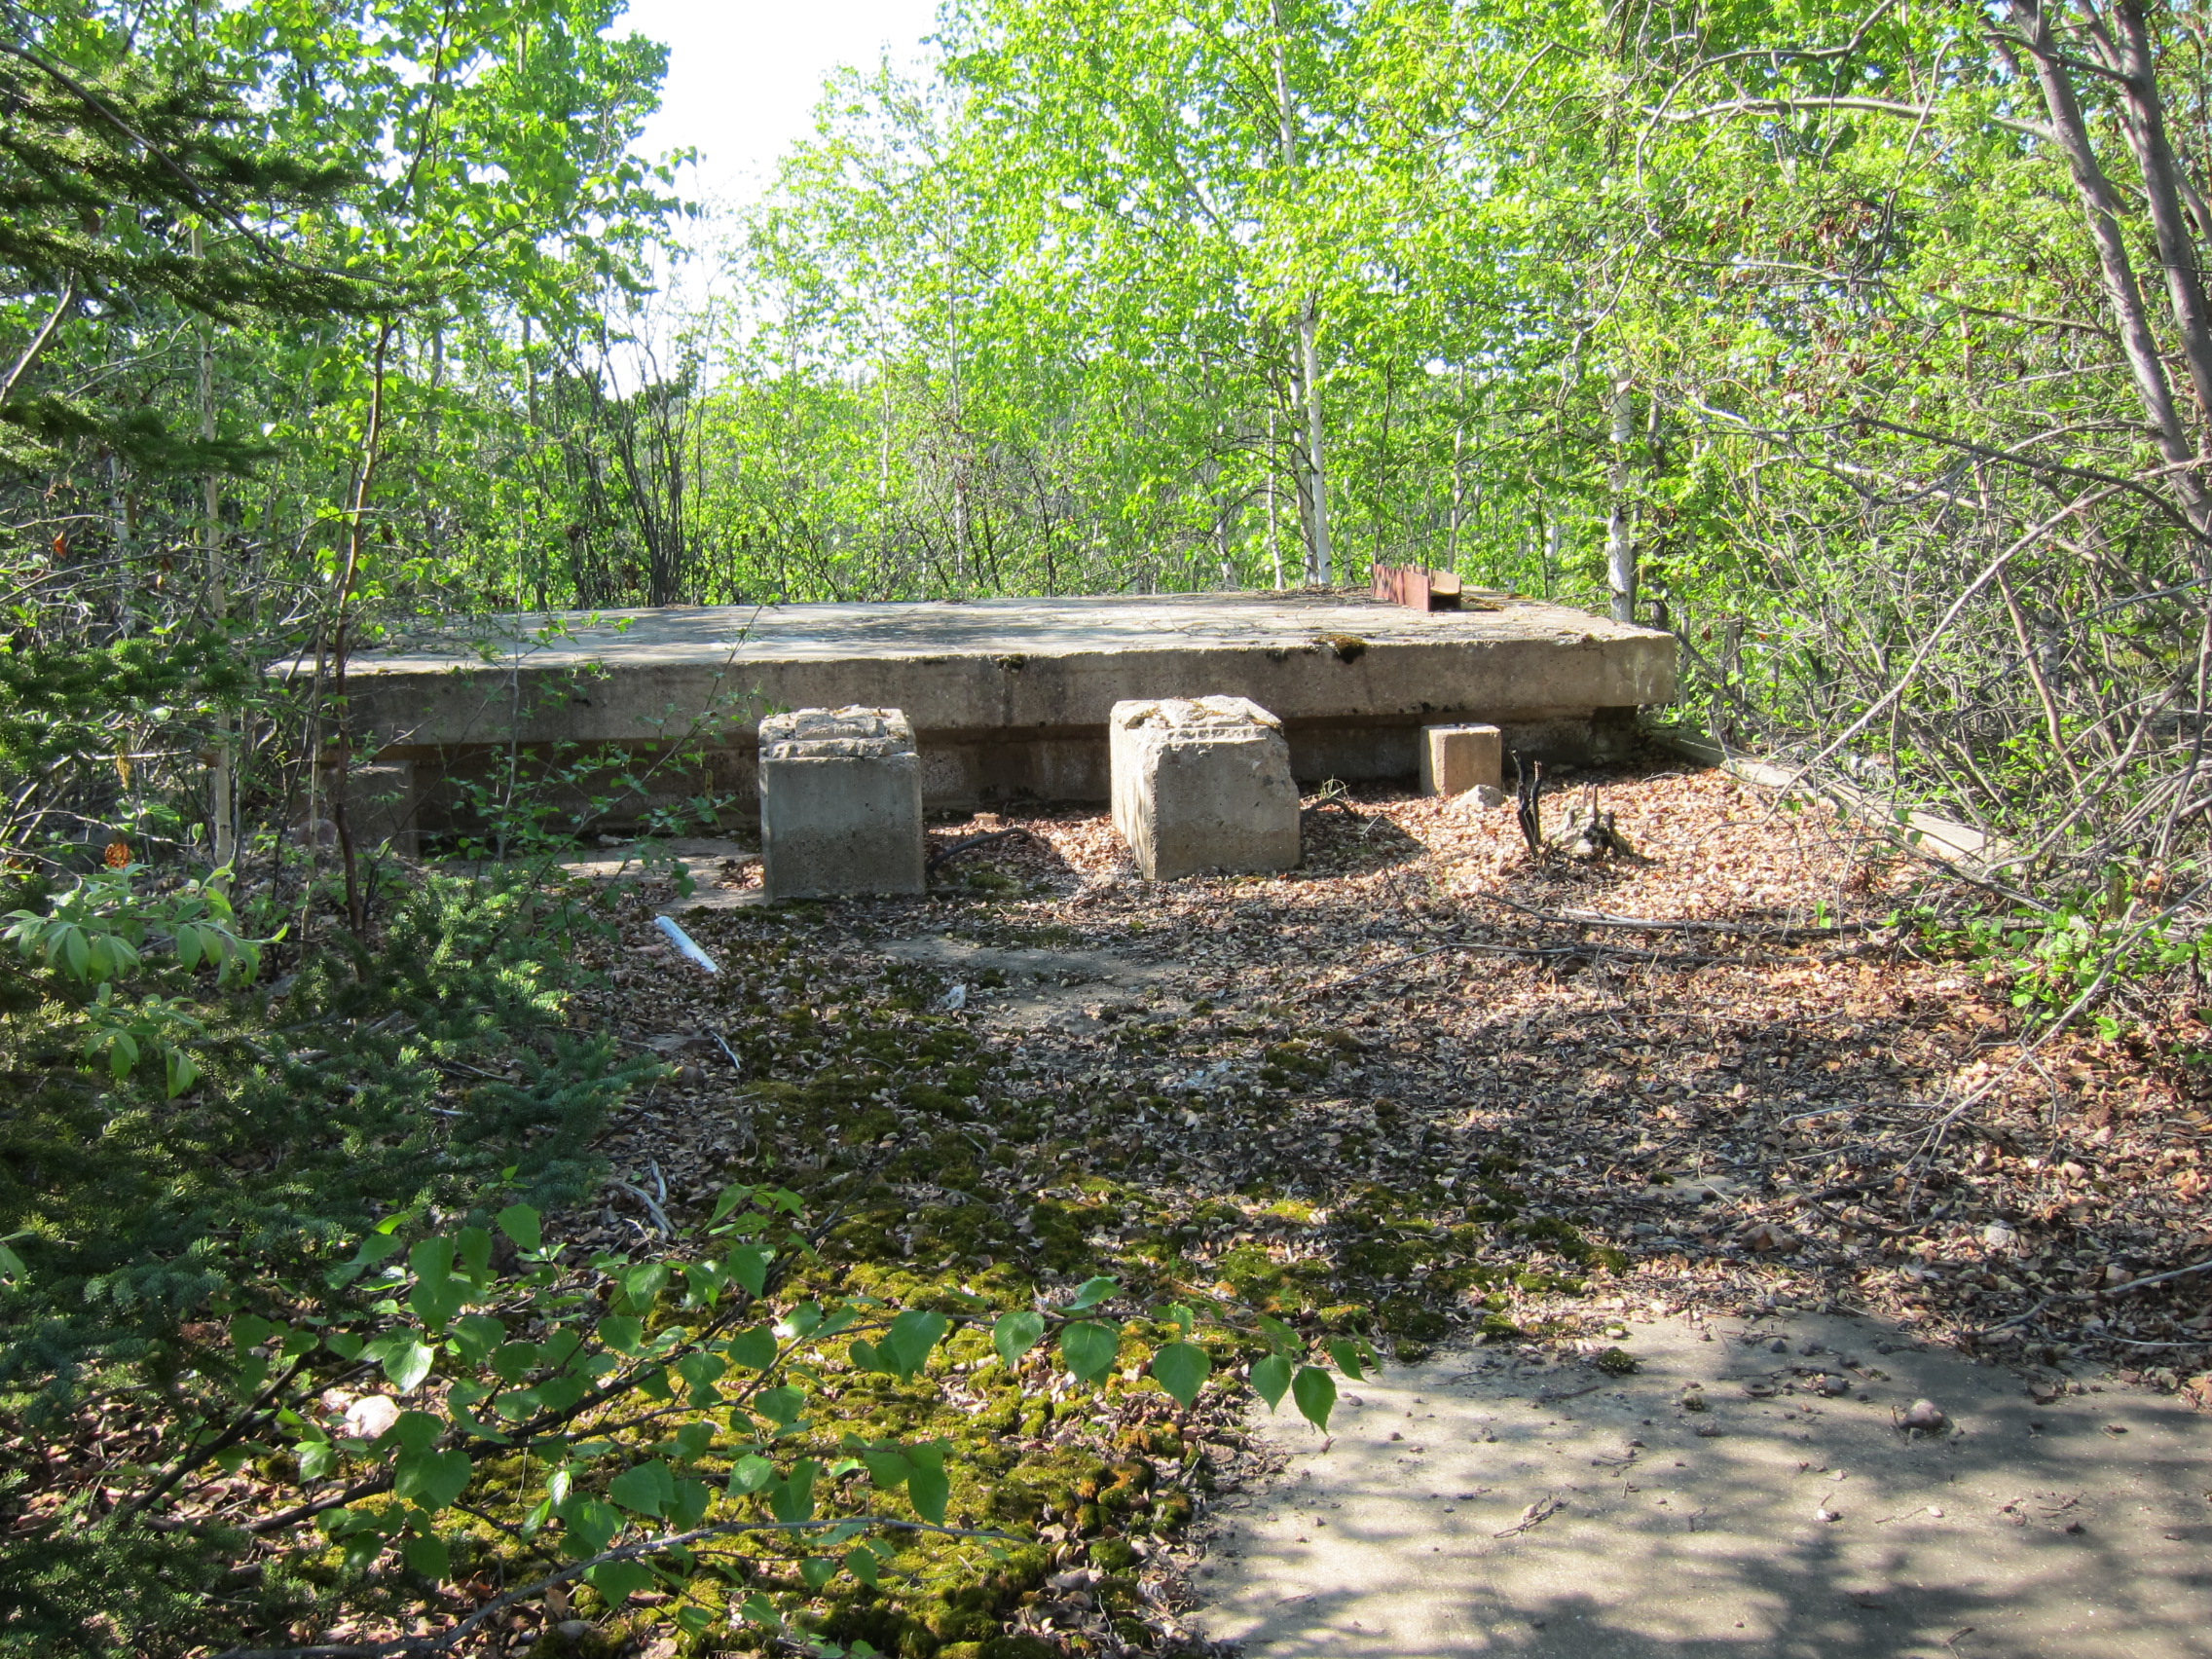 Remnants of a concrete structure in the forest